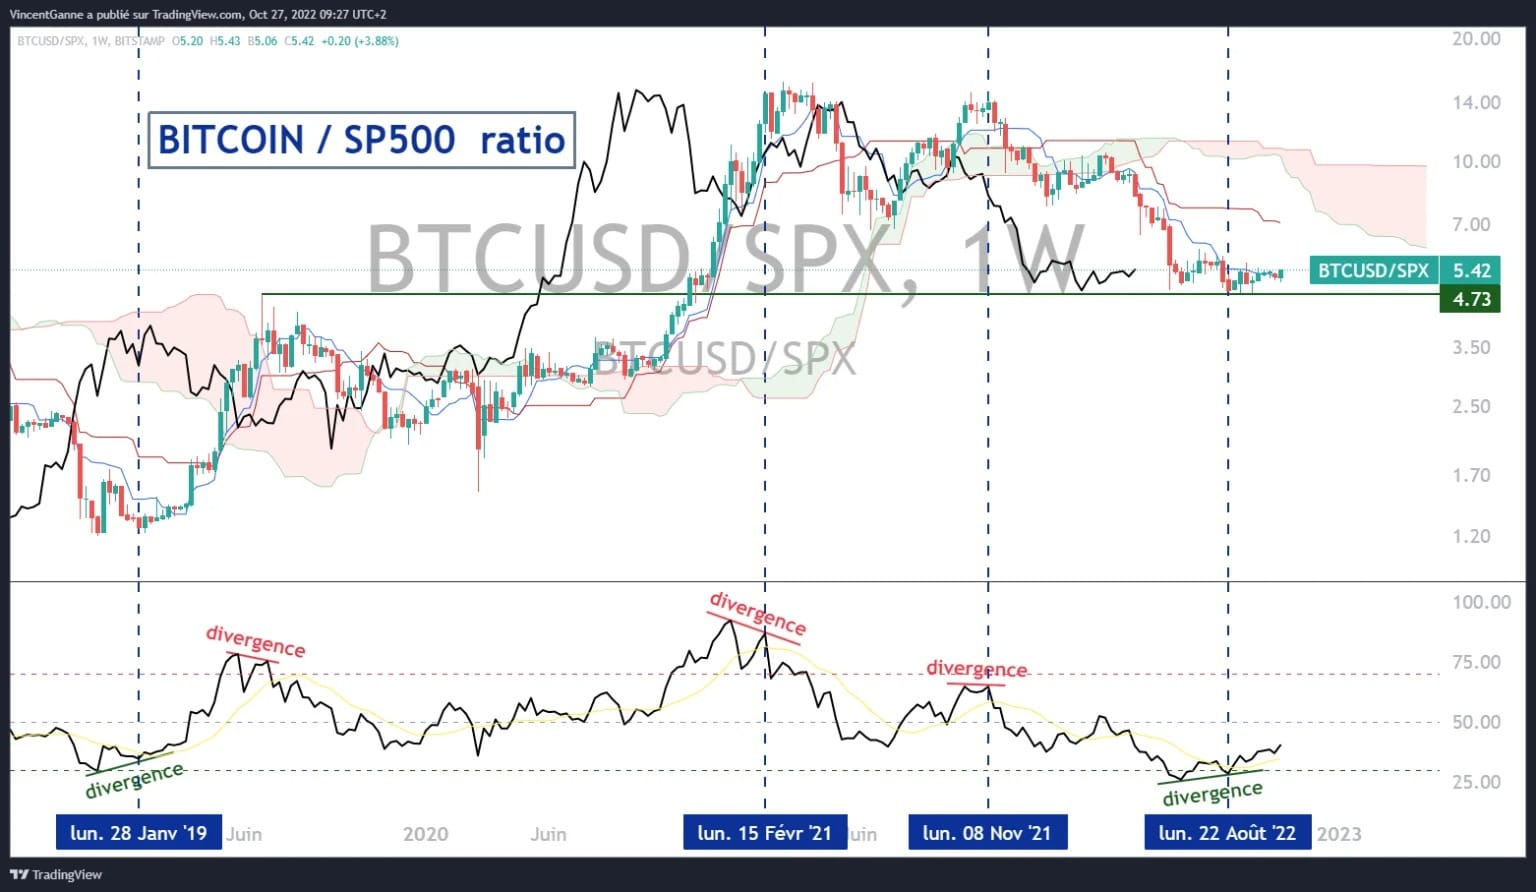 Weekly Bitcoin to P500 ratio, the relative ratio of BTC to the US equity market